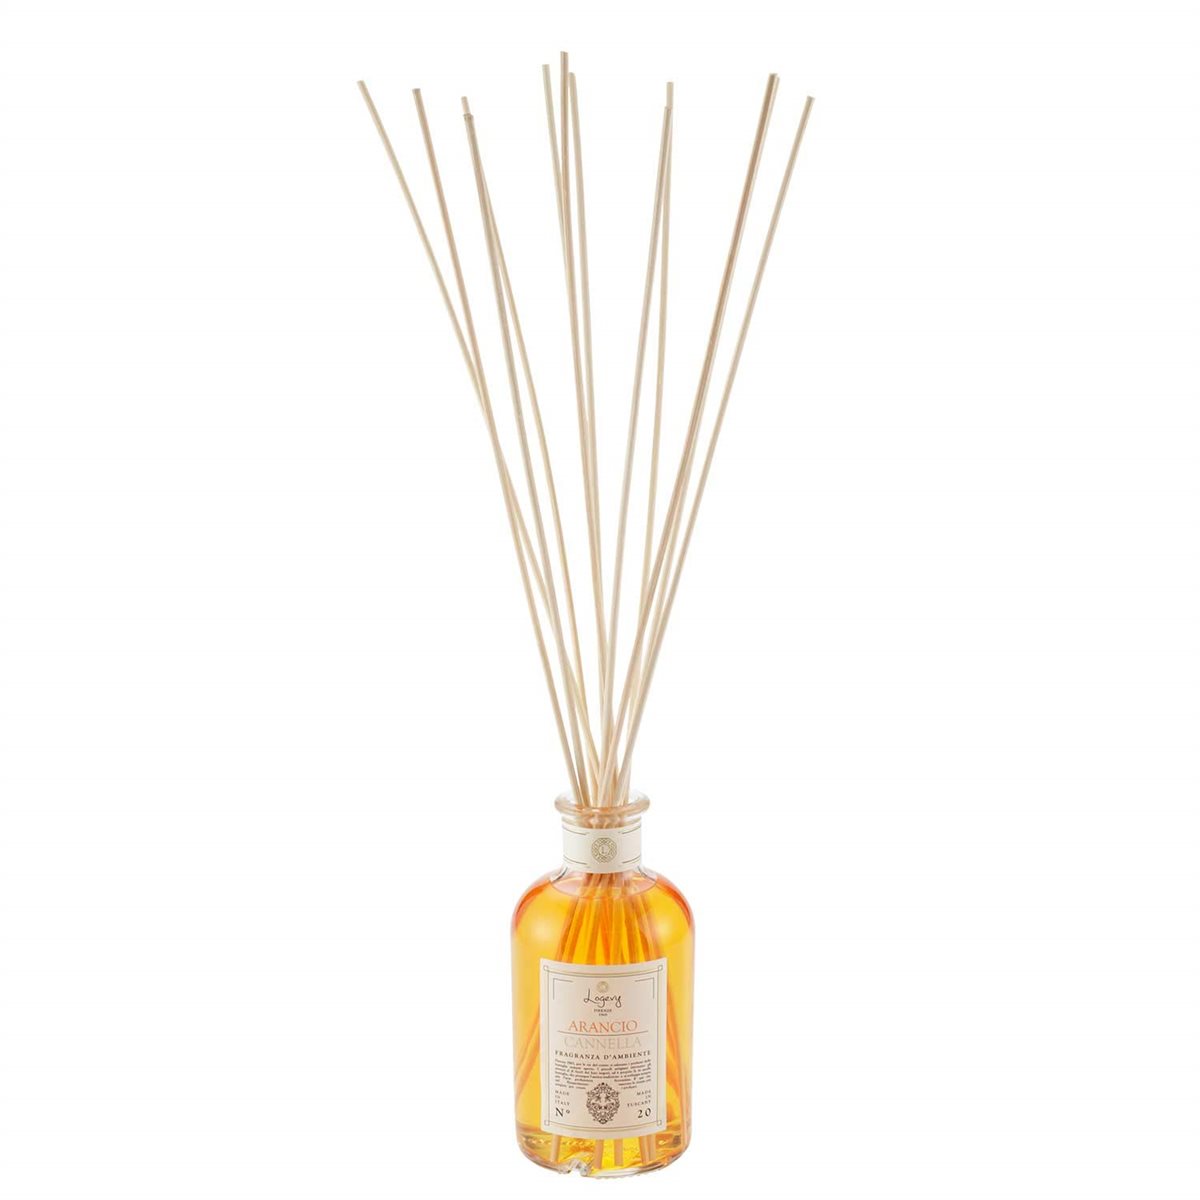 Magnum Air Freshener 3 Liters for the Wellbeing of the Home - Cinnamon Orange